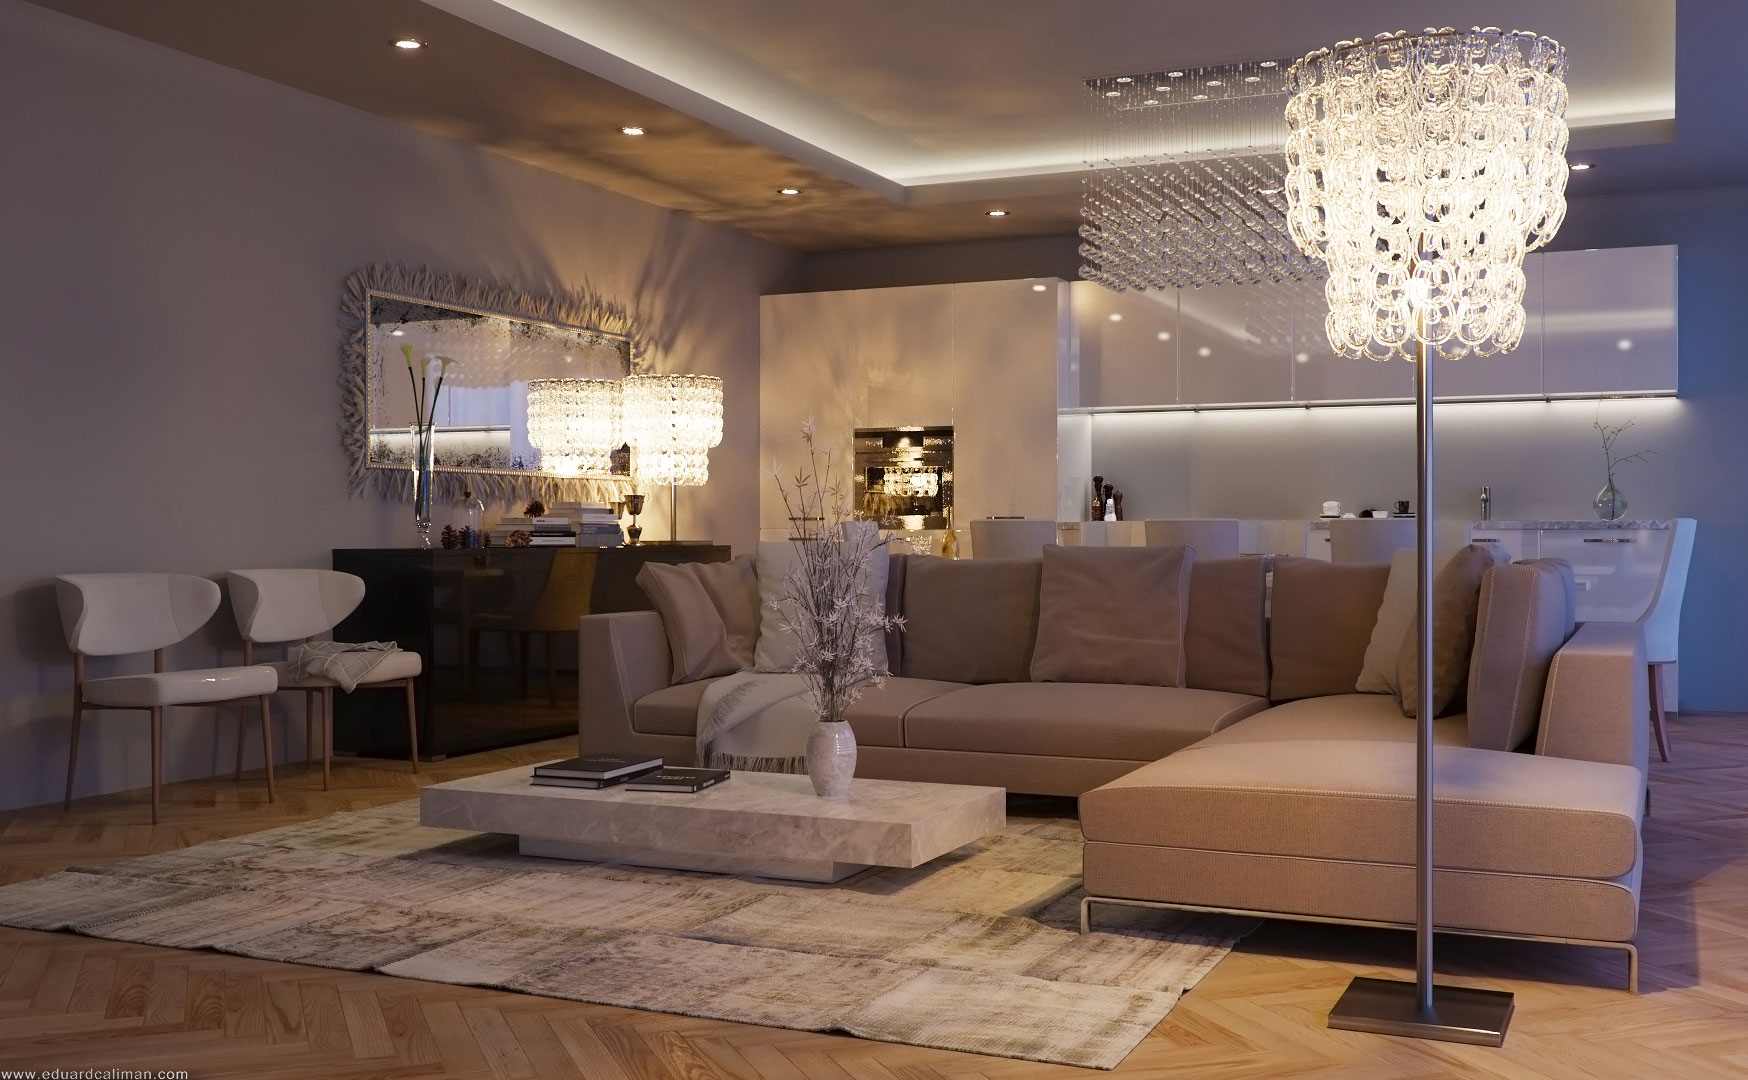 Project Design With Cool Project Design Caliman Eduard With Sparkling Chandelier And LED Light Sectional Sofa Marble Coffee Table Wood Floor Minimalist Cabinet  Luxury Living Room In Elegant Contemporary Style